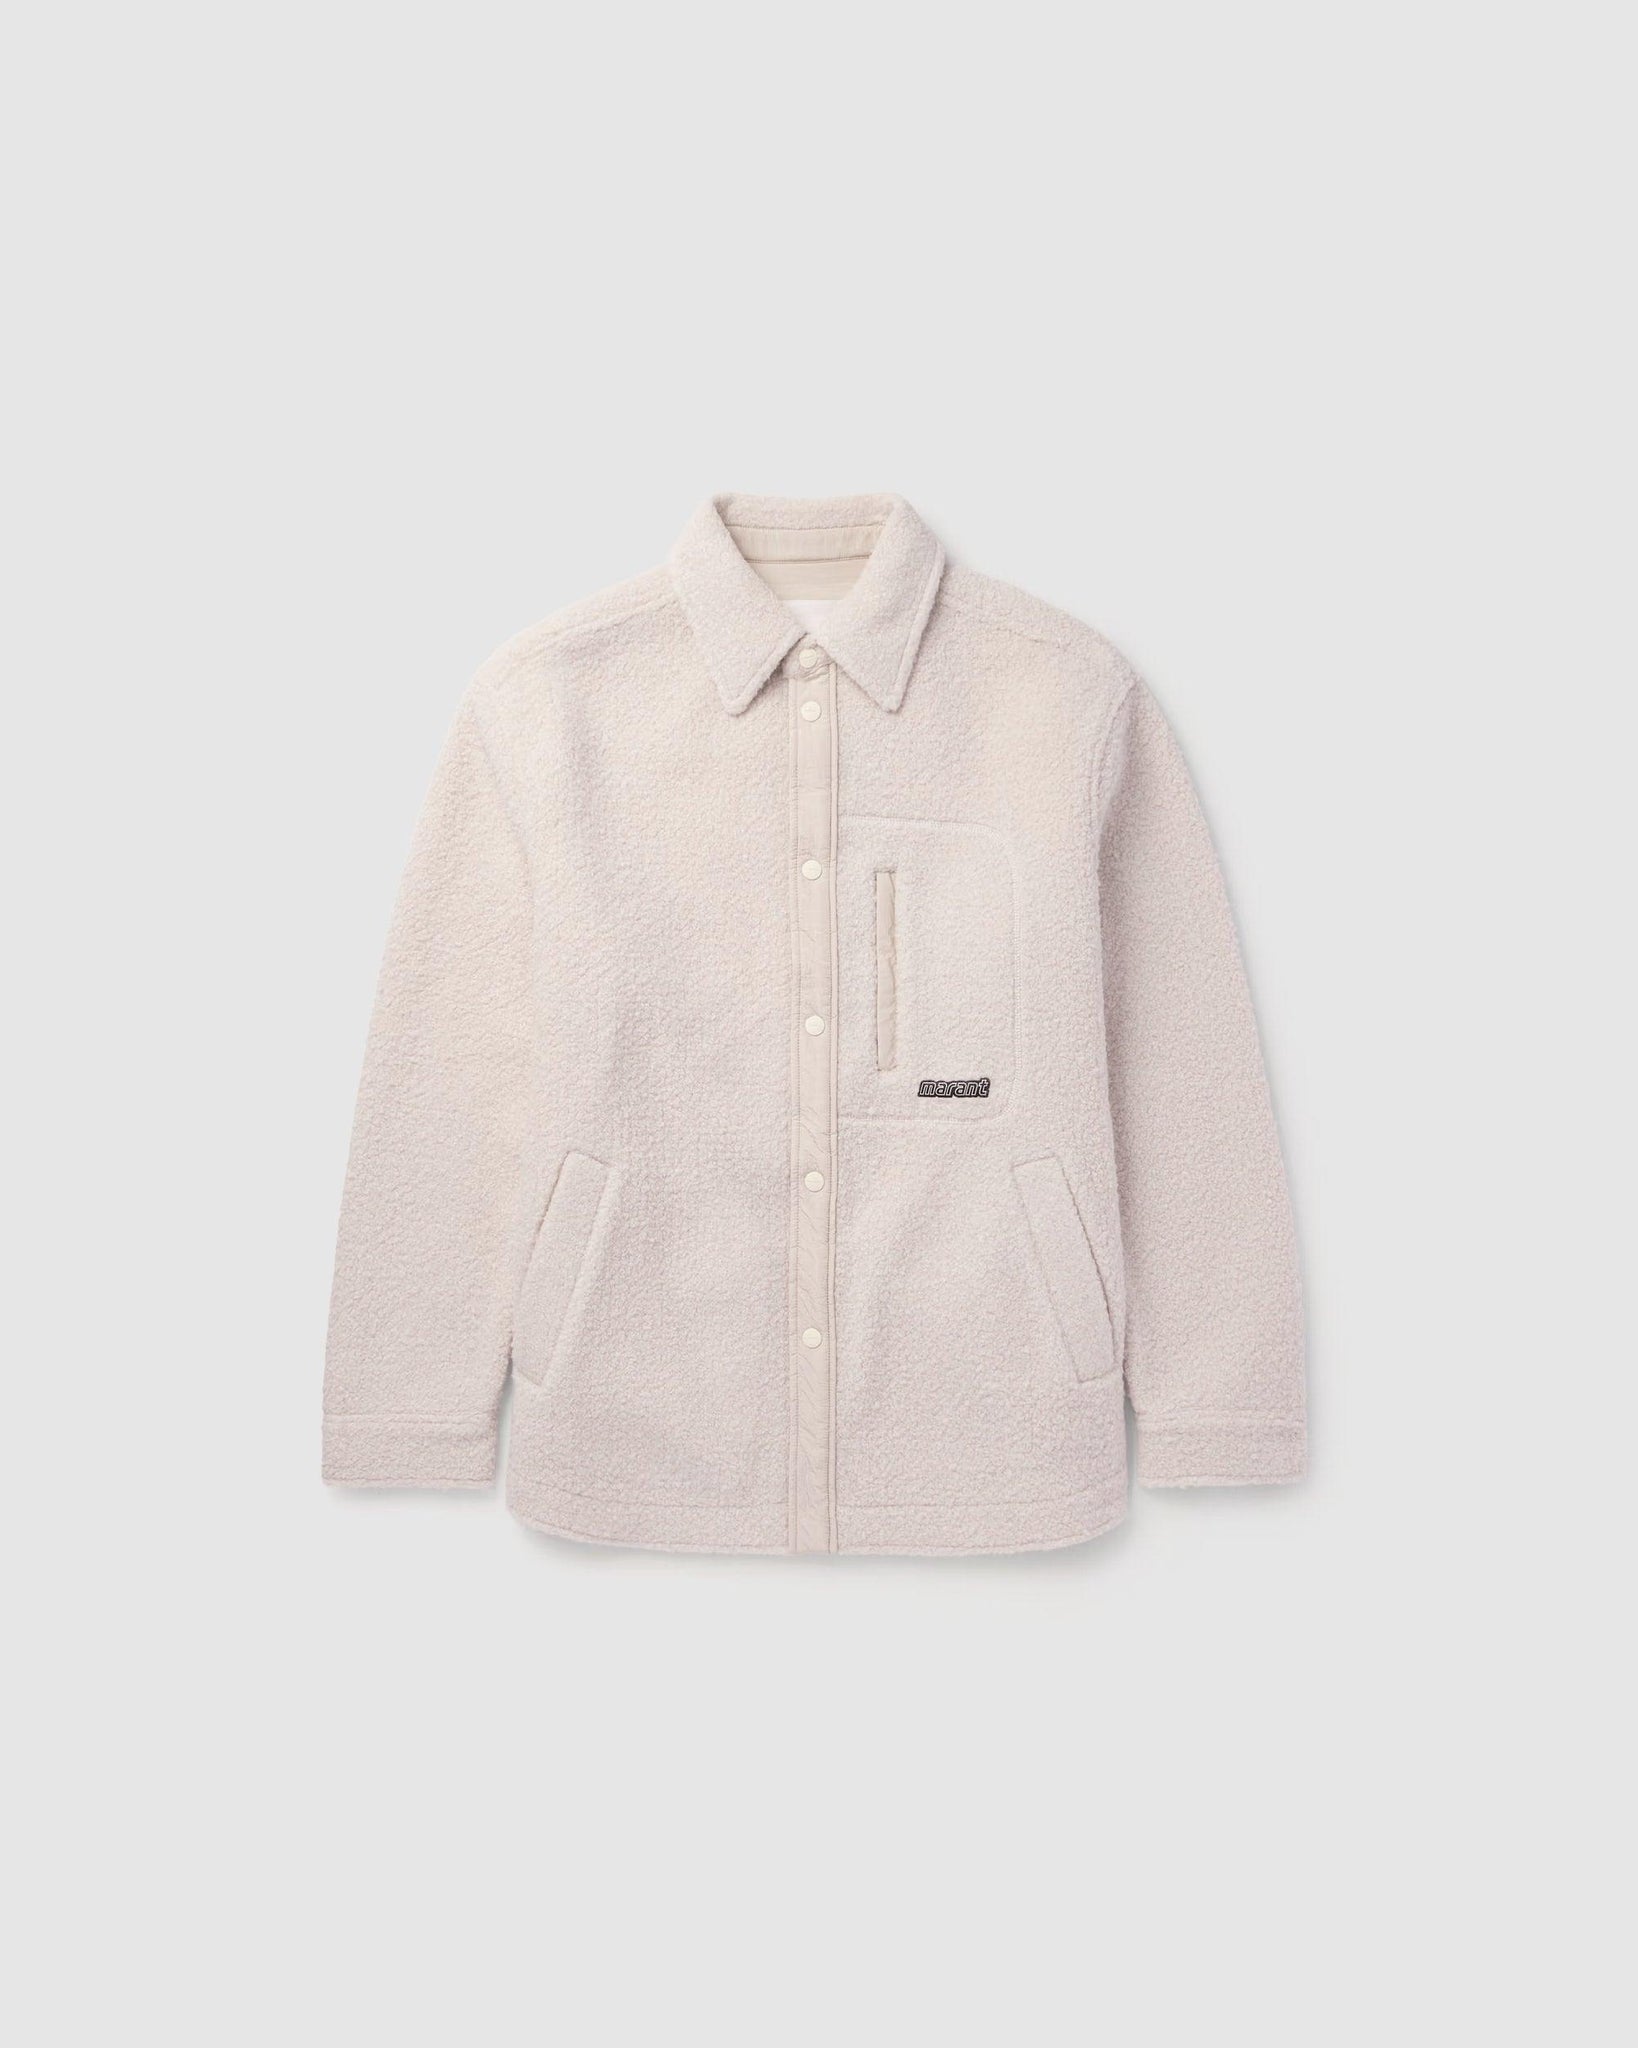 Maja Fleece Jacket - {{ collection.title }} - Chinatown Country Club 